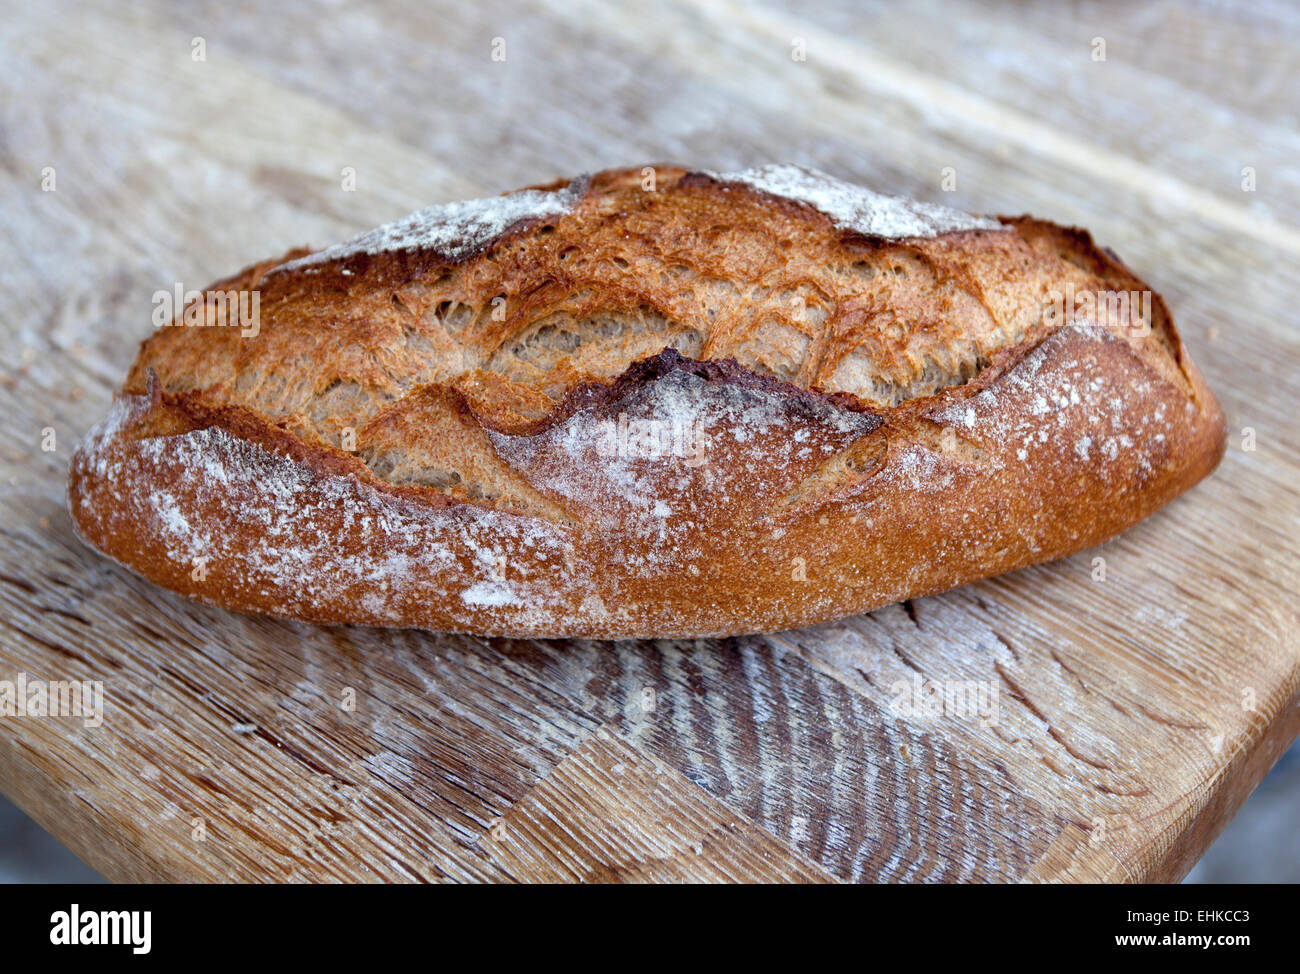 A loaf of freshly baked wholemeal bread Stock Photo